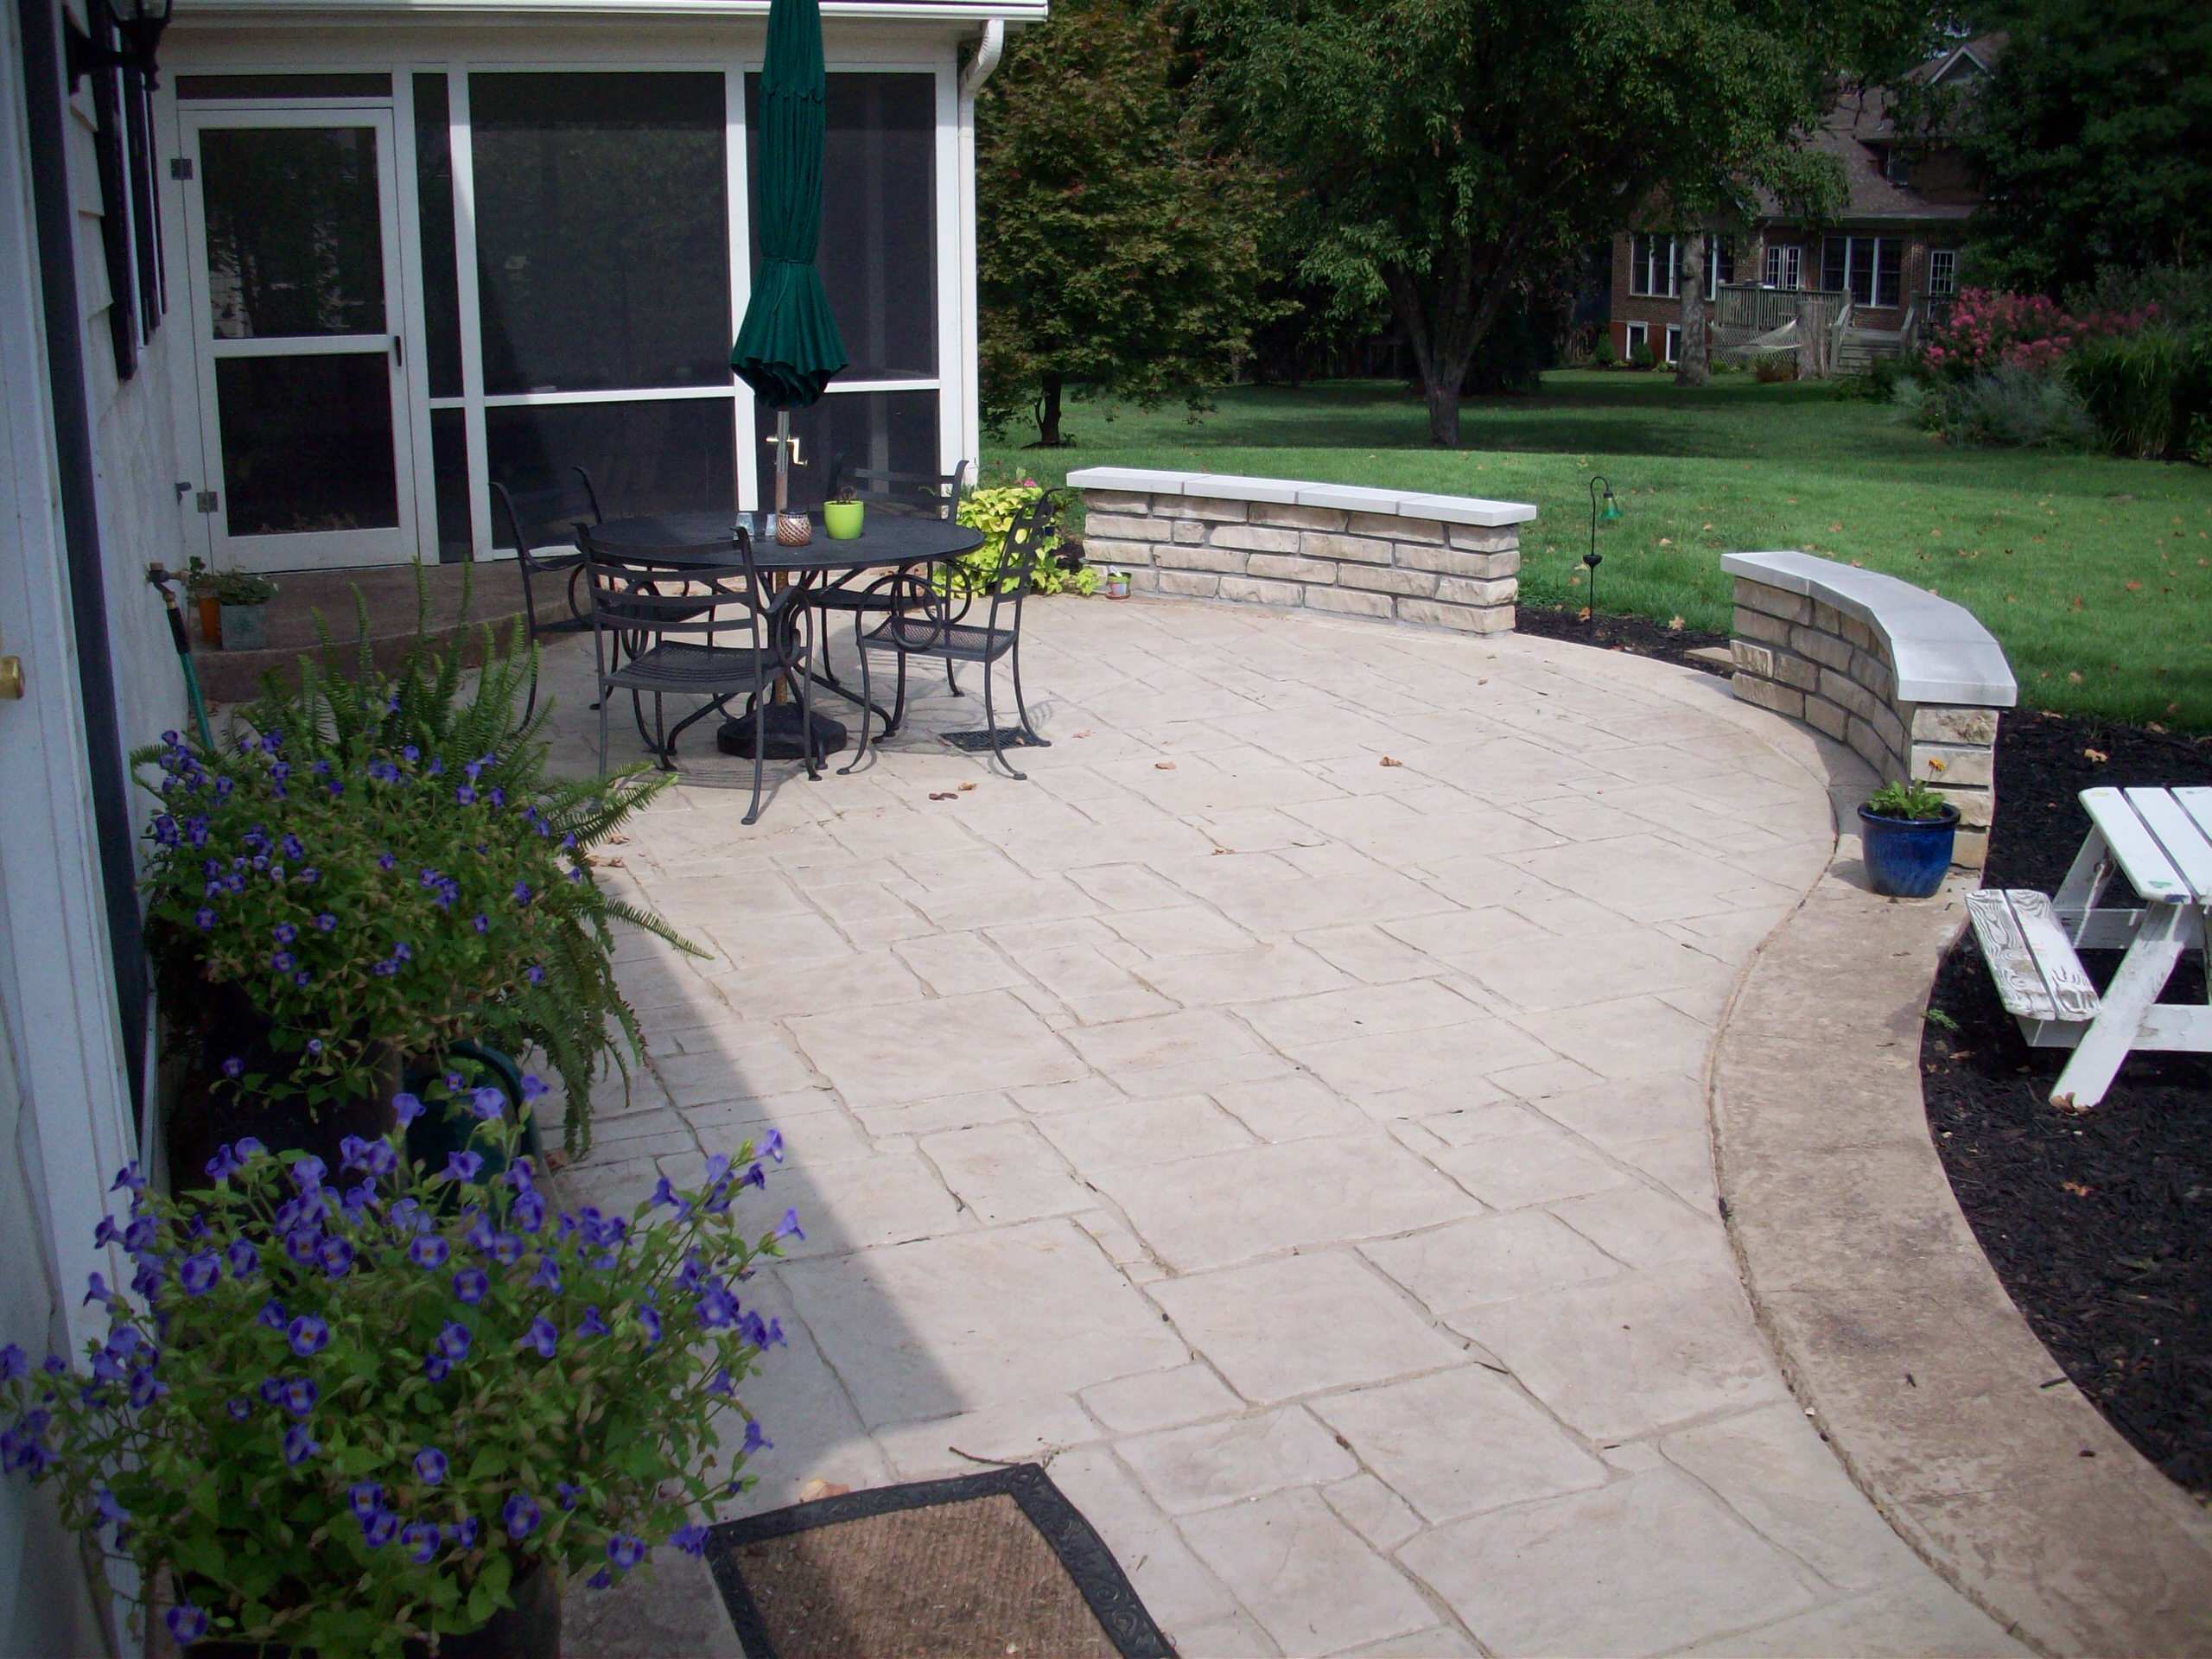 Webster Groves, Missouri Residence Patio Area (After)